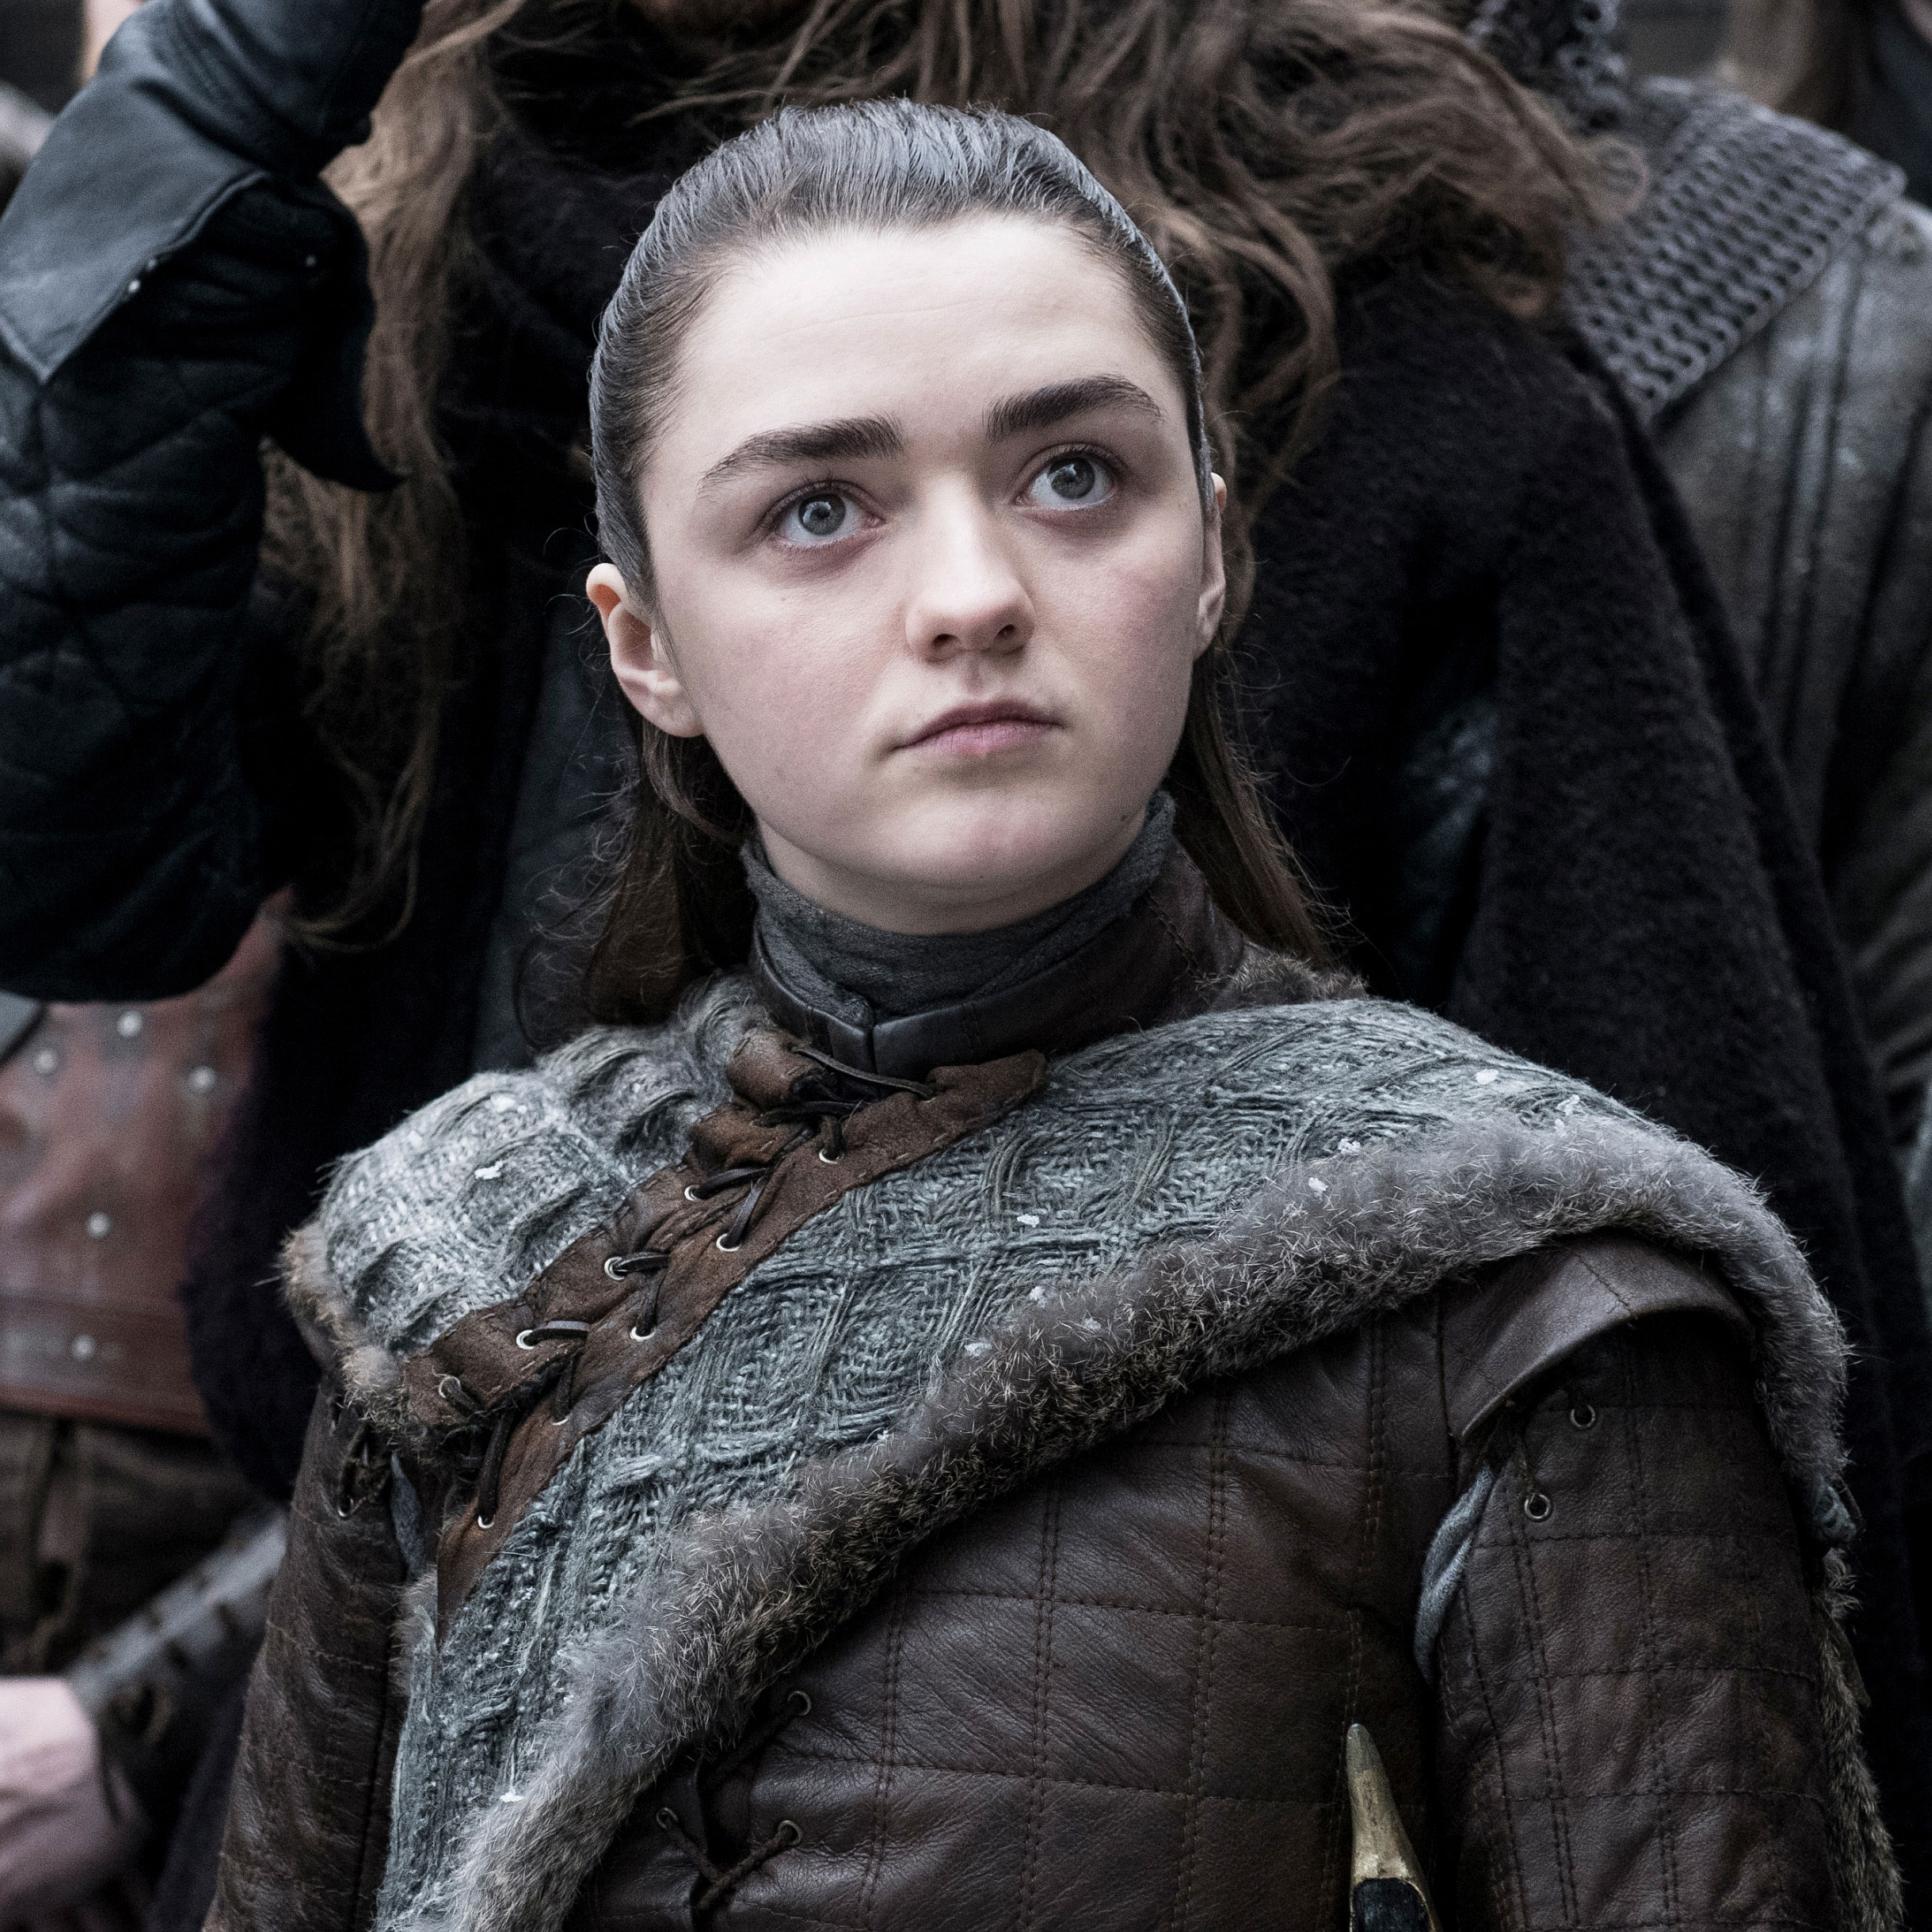 Maisie William started acting at the age of 13 in the TV series Game of Thrones as Arya Stark.